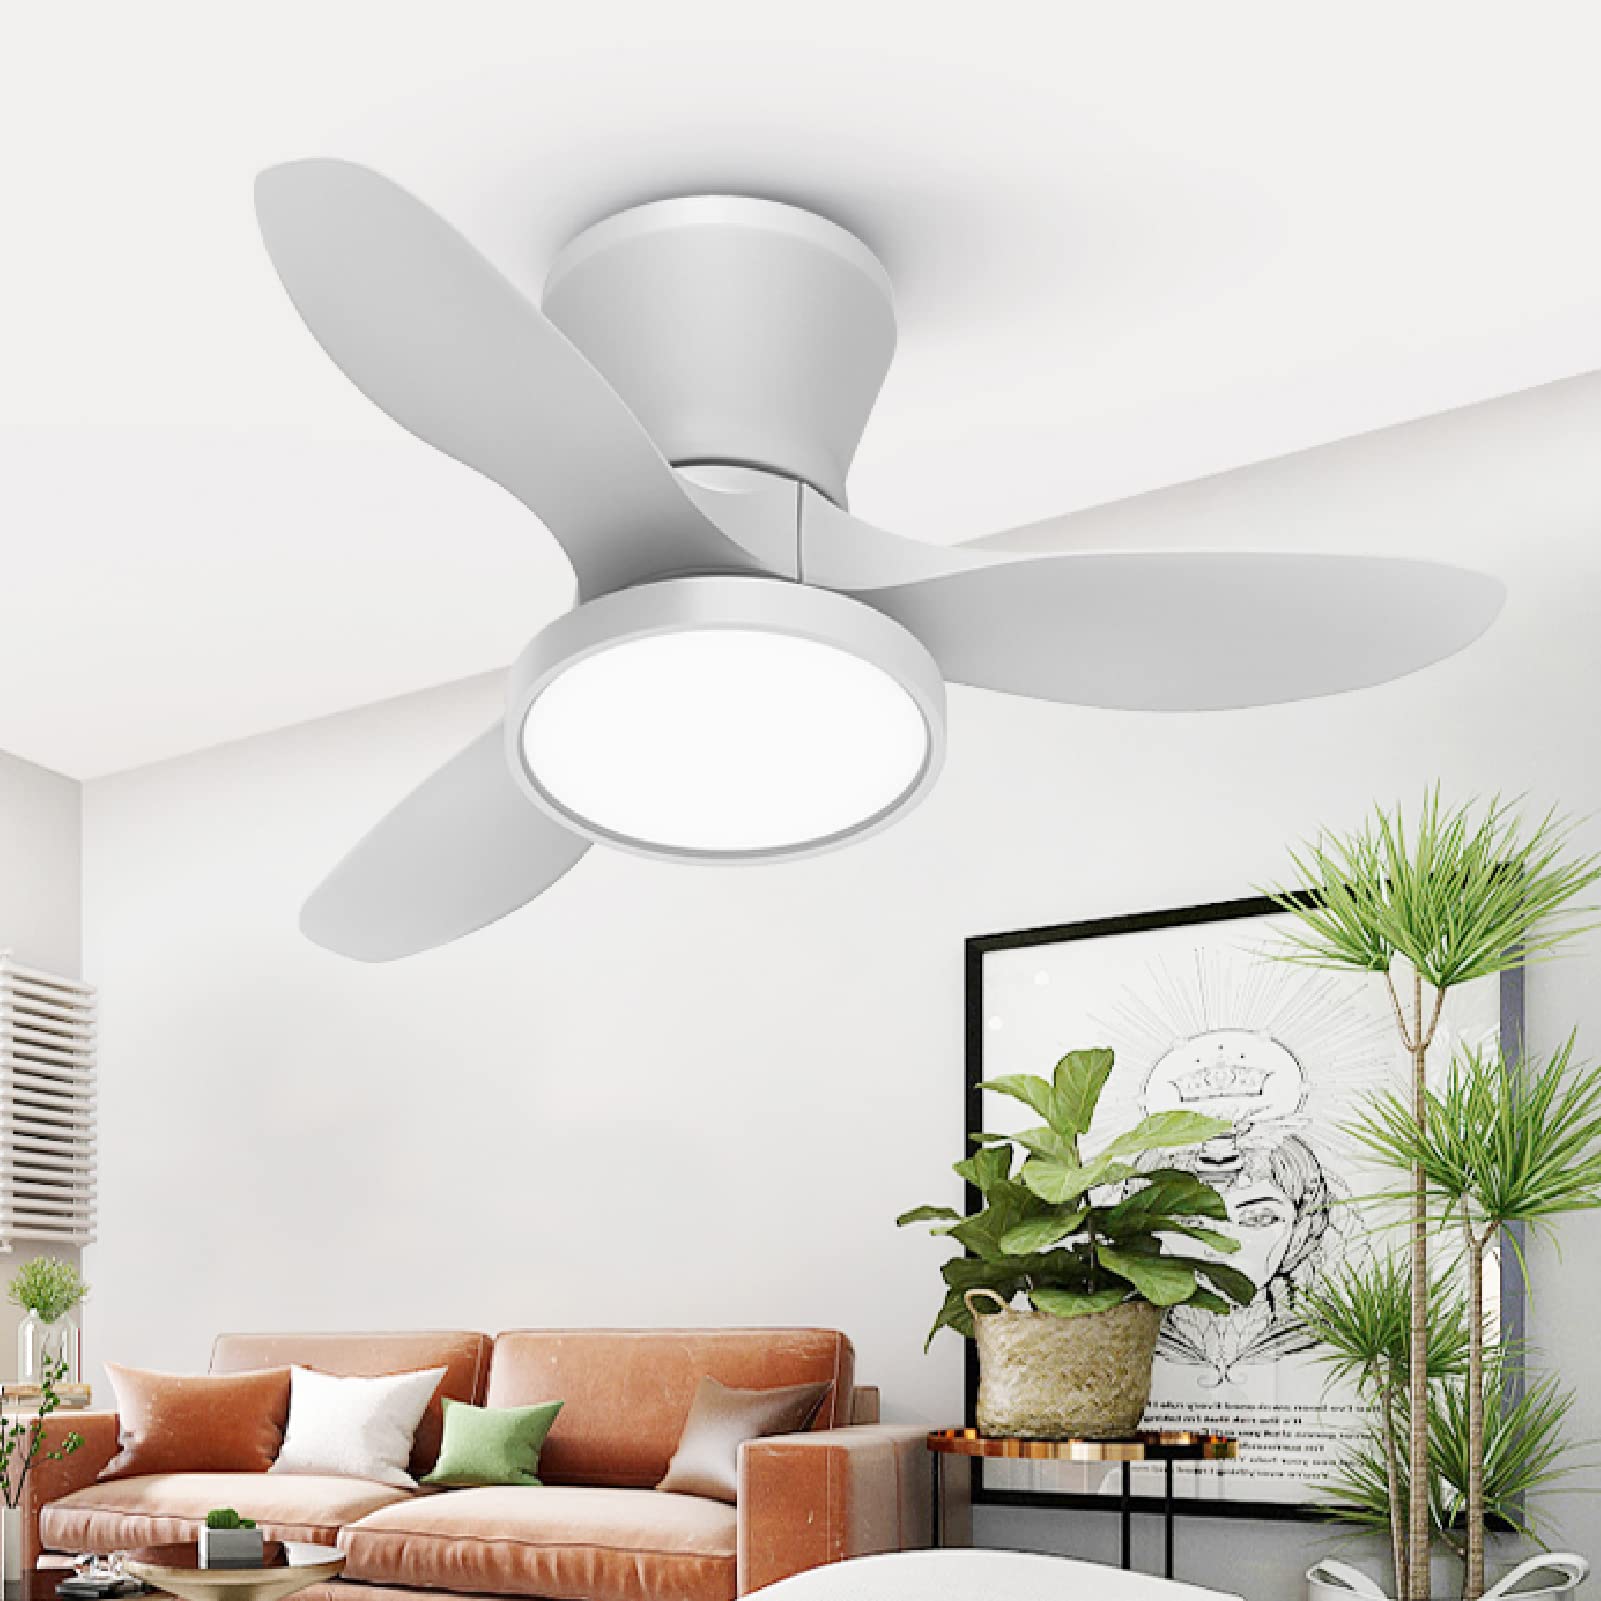 ocioc Quiet Ceiling Fan with LED Light DC Motor 32 inch Large Air Volume Remote Control White for Kitchen Bedroom Dining Room Patio